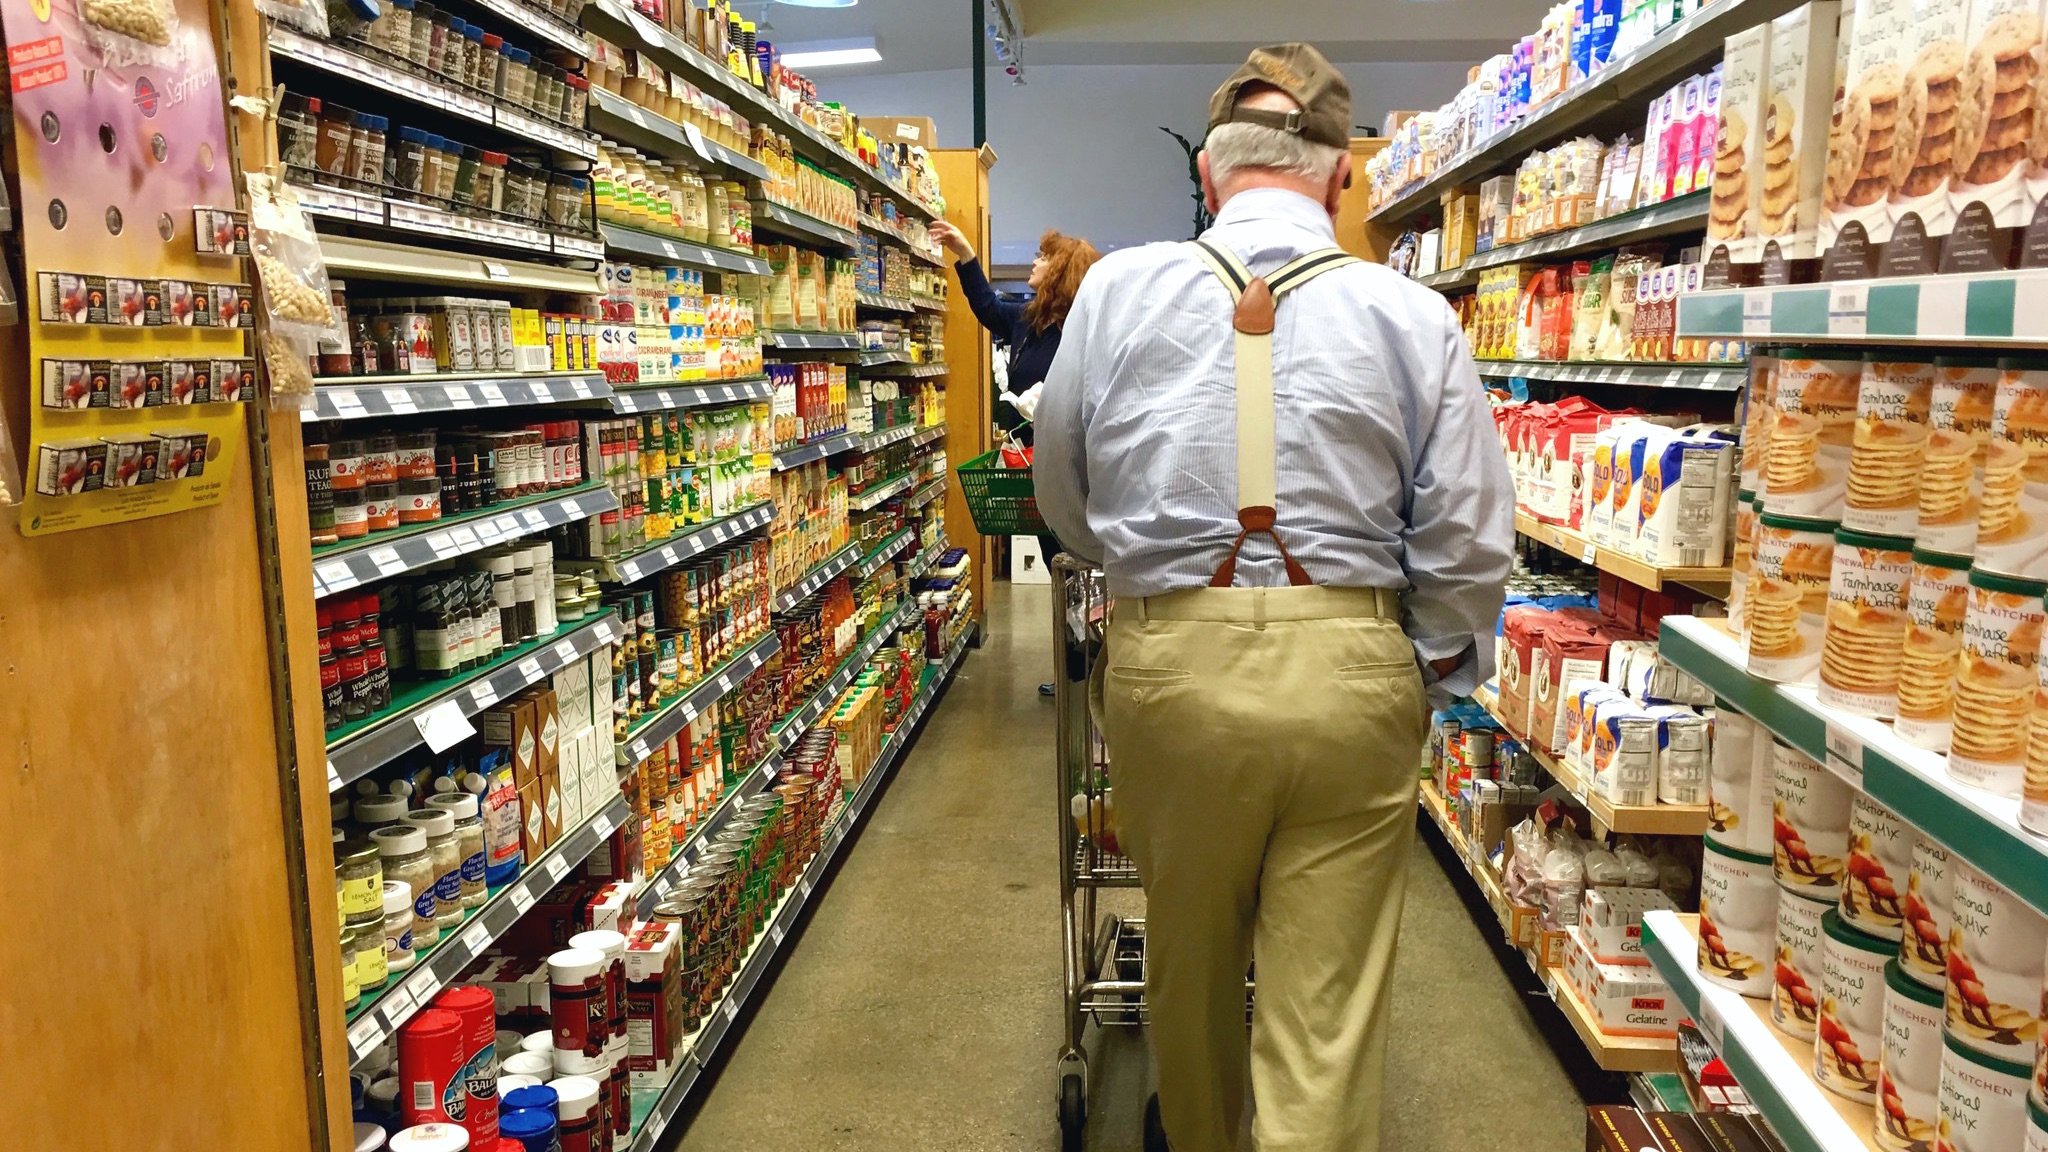 Grocers are setting aside shopping hours for seniors, to protect them from COVID-19. (Lynn Friedman / Flickr)